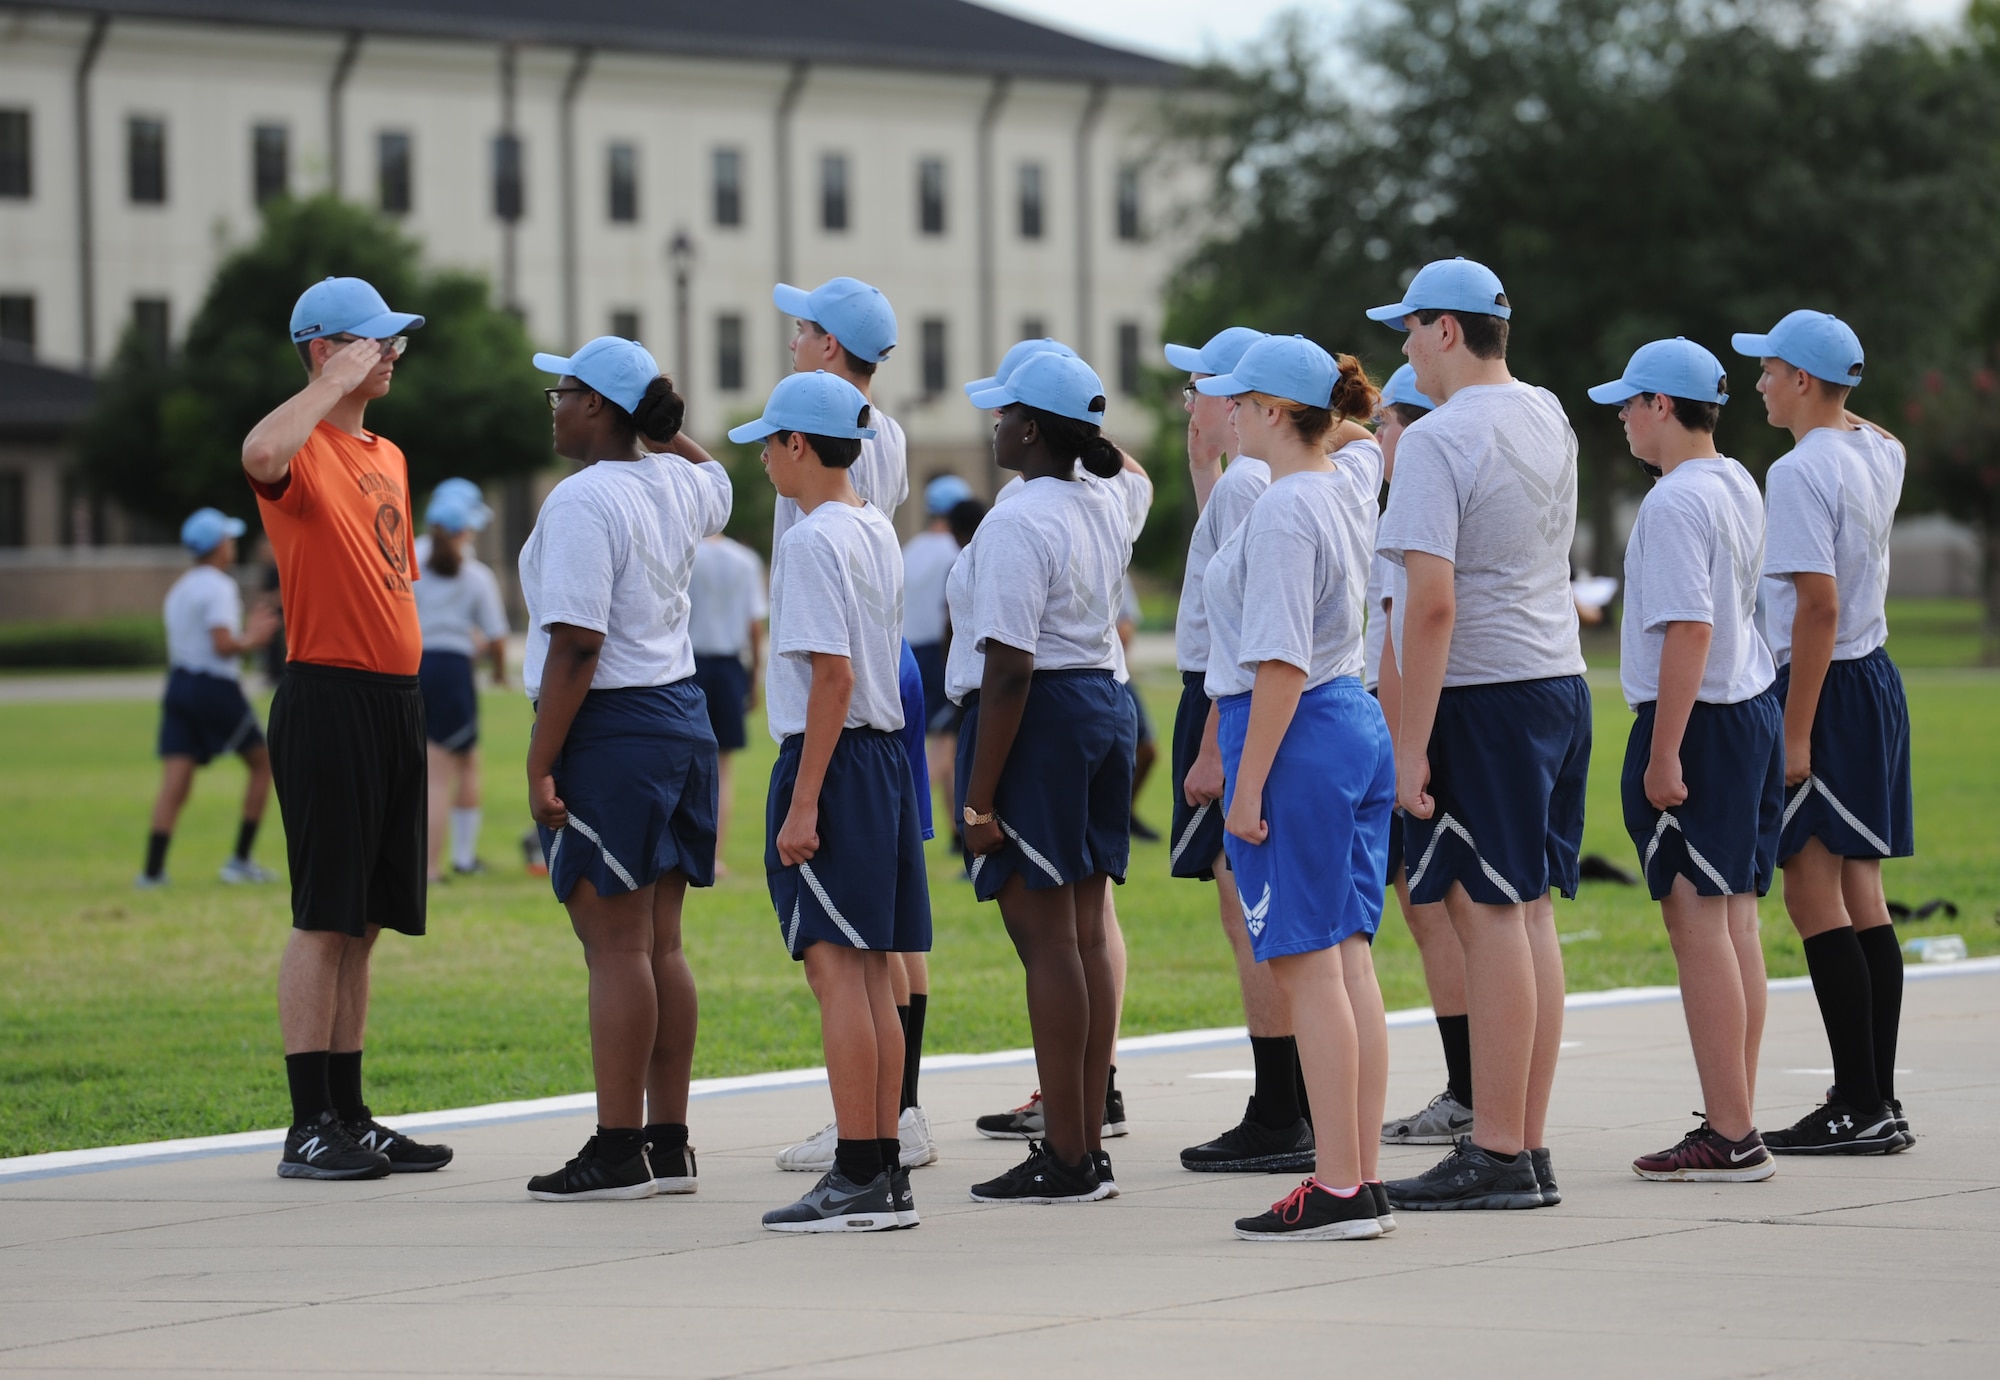 Lancer Flight cadets participate in a drill competition during a Junior ROTC Cadet Leadership Course at the Levitow Training Support Facility July 12, 2017, on Keesler Air Force Base, Miss. Approximately 140 JROTC students from 15 high schools in five states attended the week-long course at Keesler that ended with a parade and graduation ceremony. (U.S. Air Force photo by Kemberly Groue)